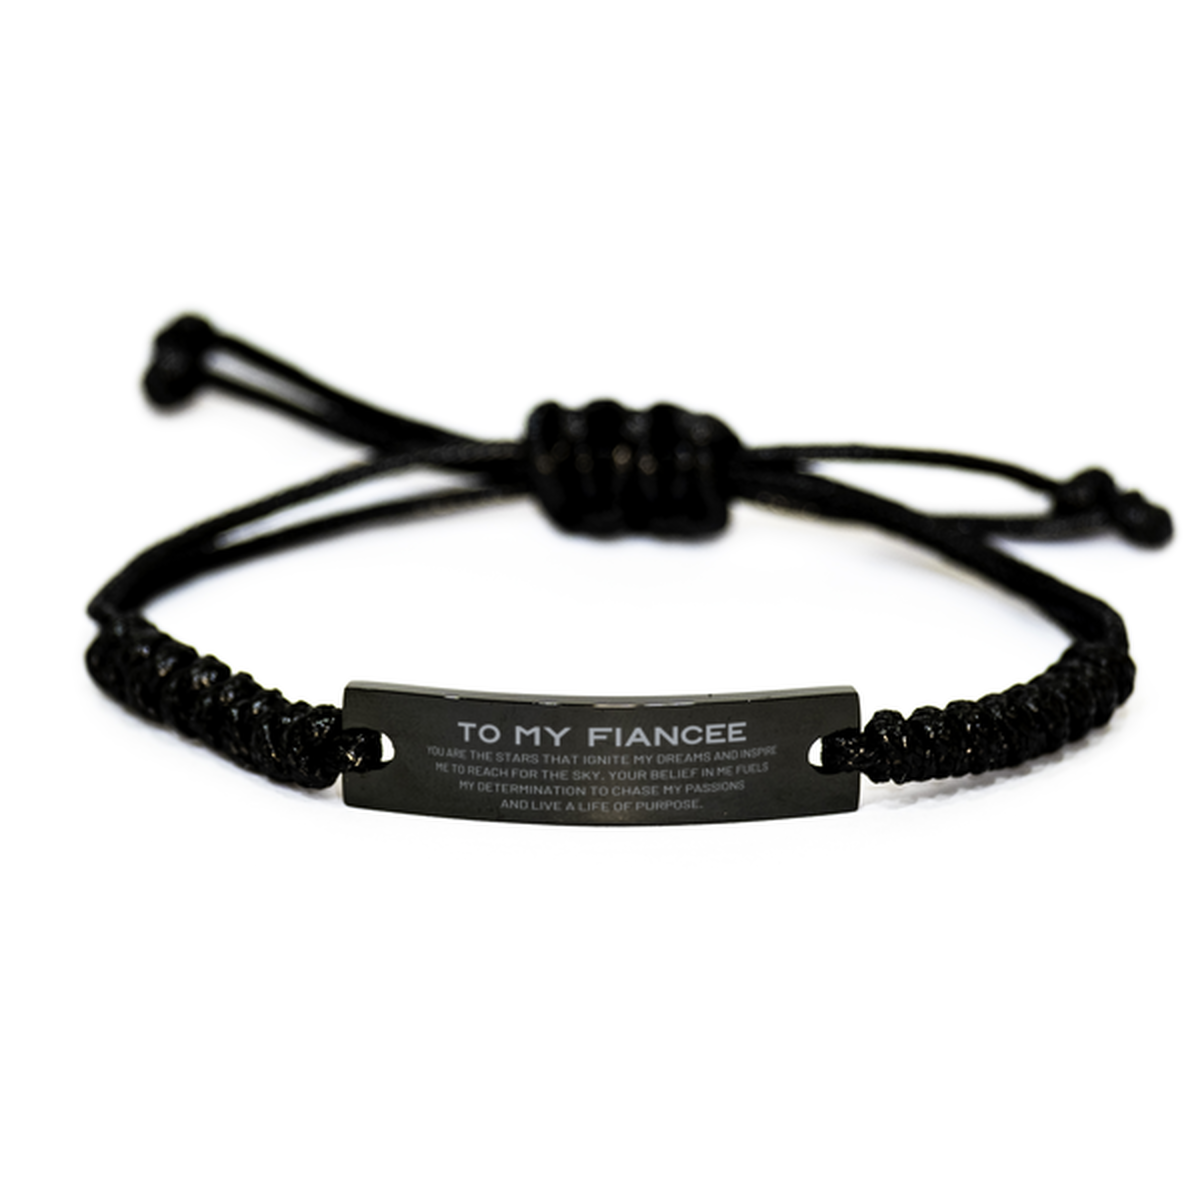 To My Fiancee Black Rope Bracelet, You are the stars that ignite my dreams and inspire me to reach for the sky, Birthday Unique Gifts For Fiancee, Thank You Gifts For Fiancee